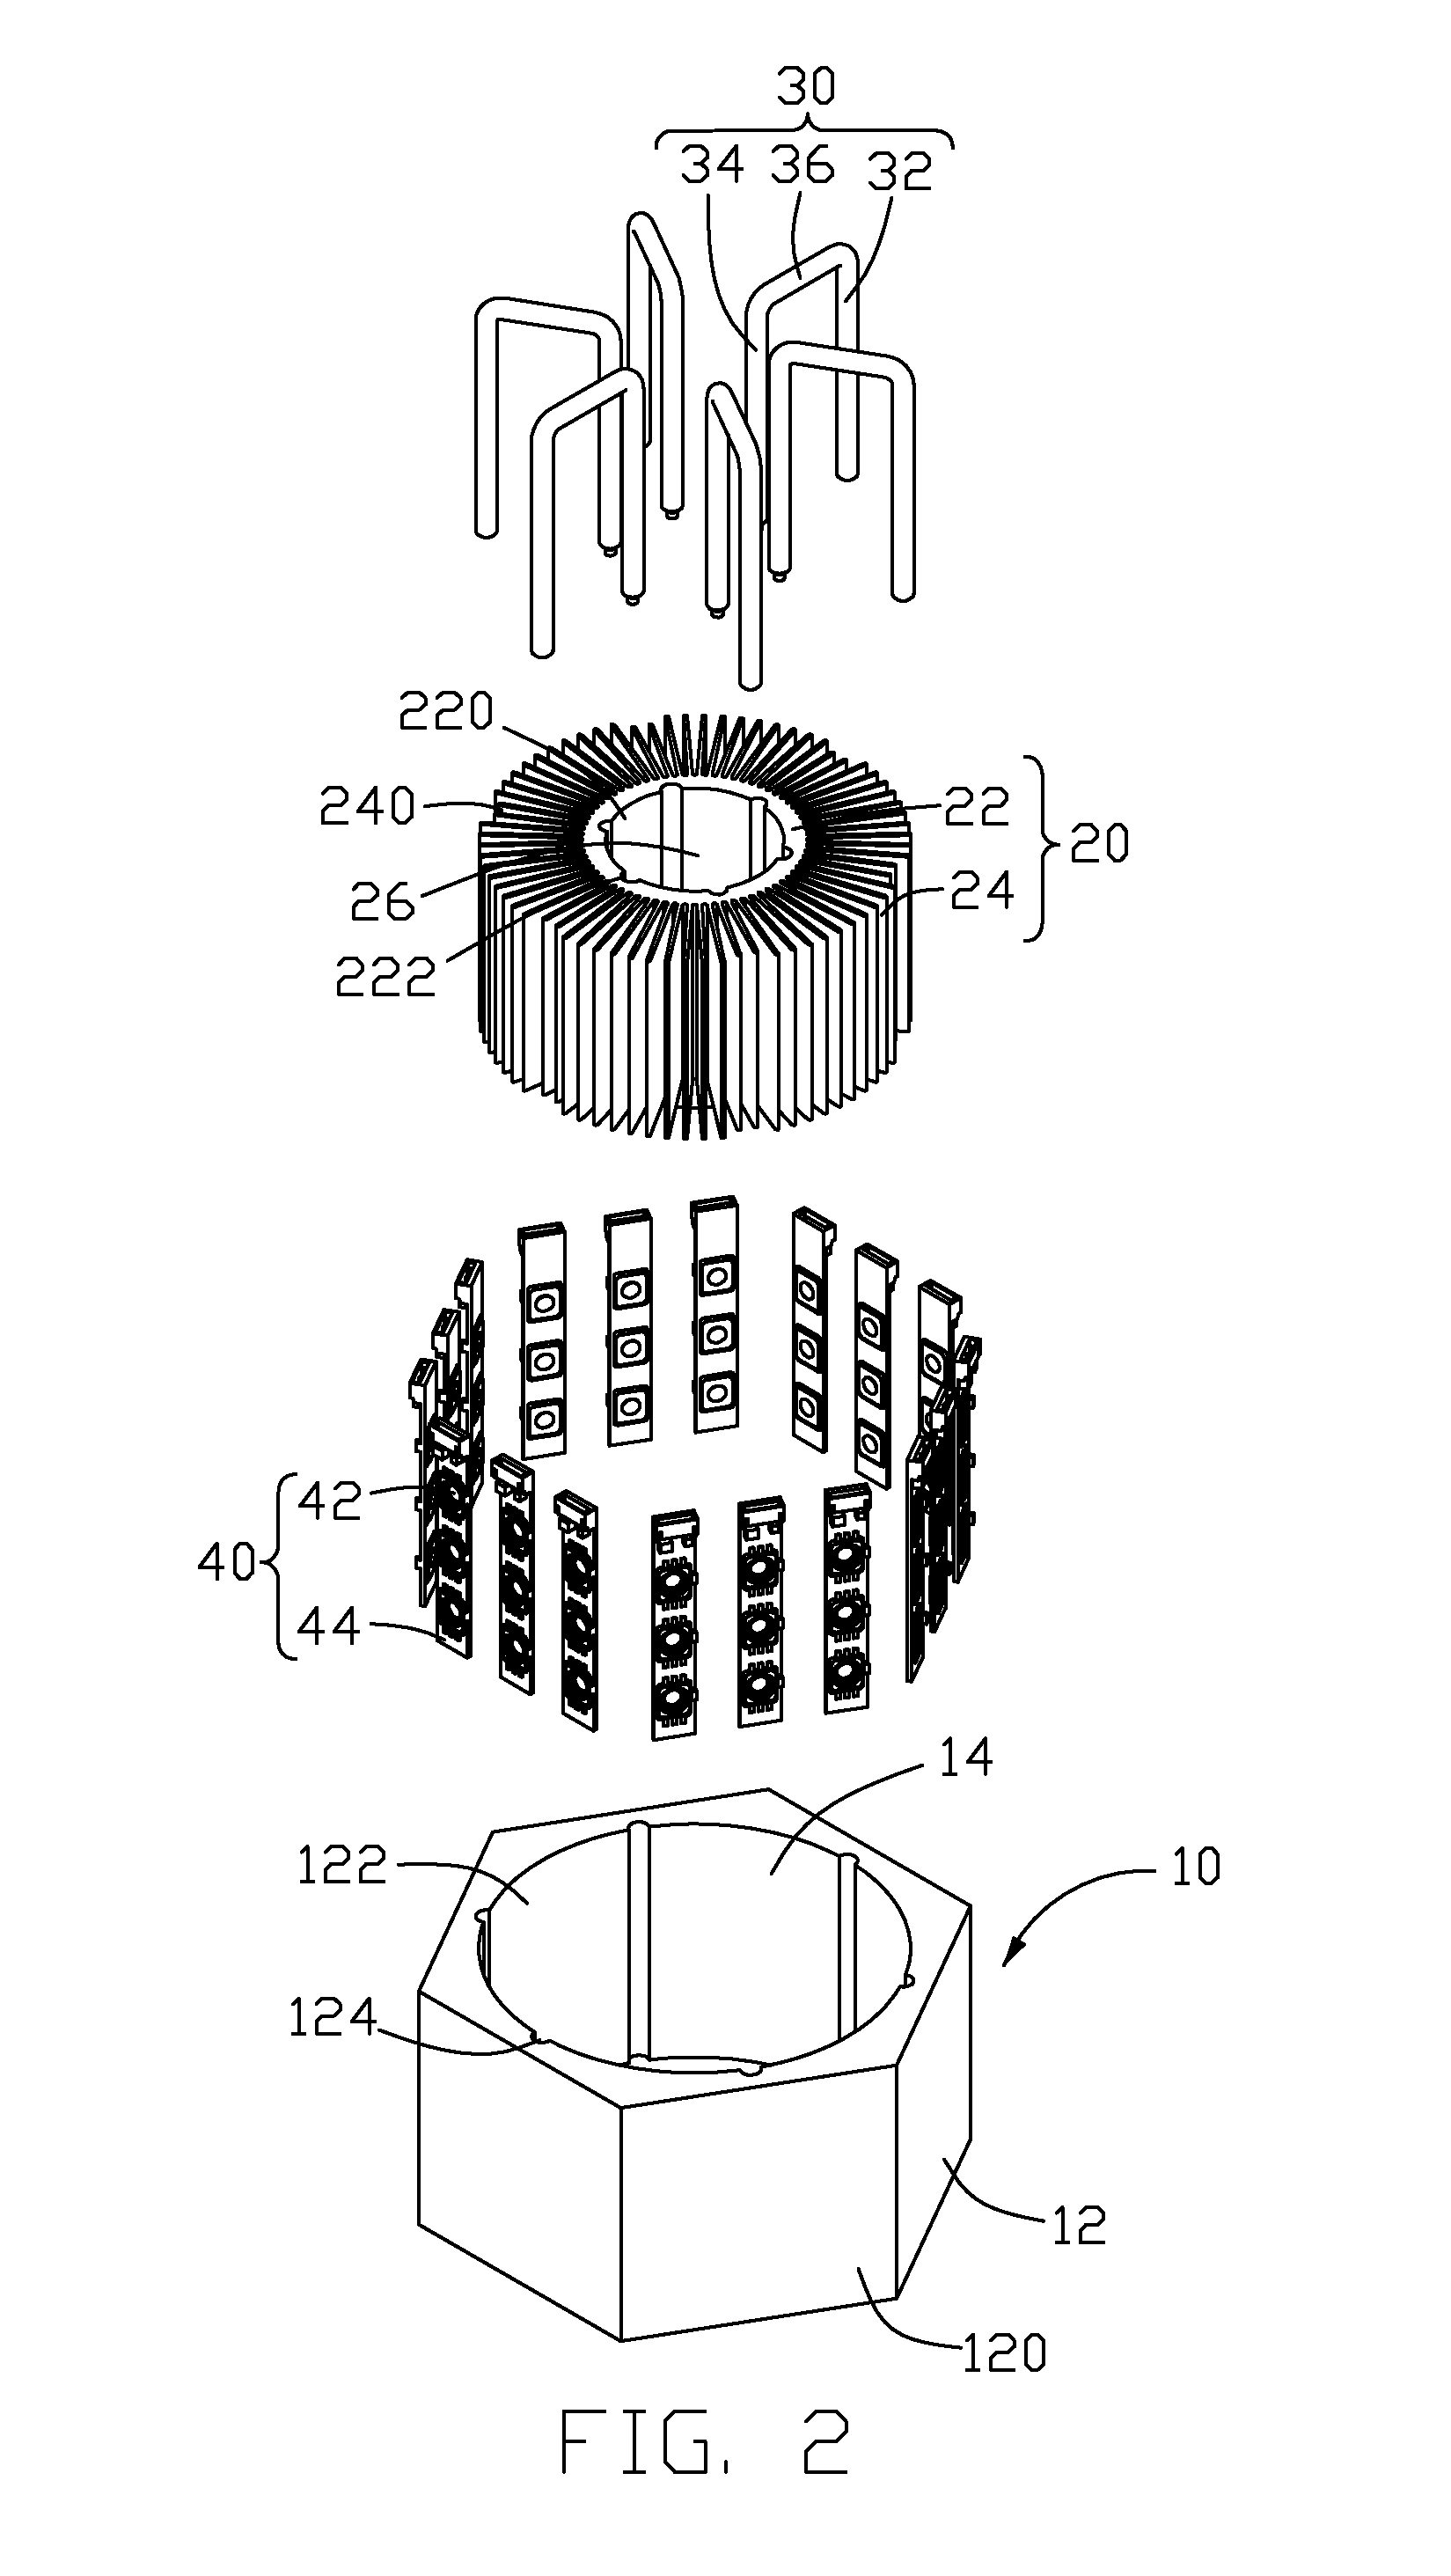 LED lamp with a heat sink assembly